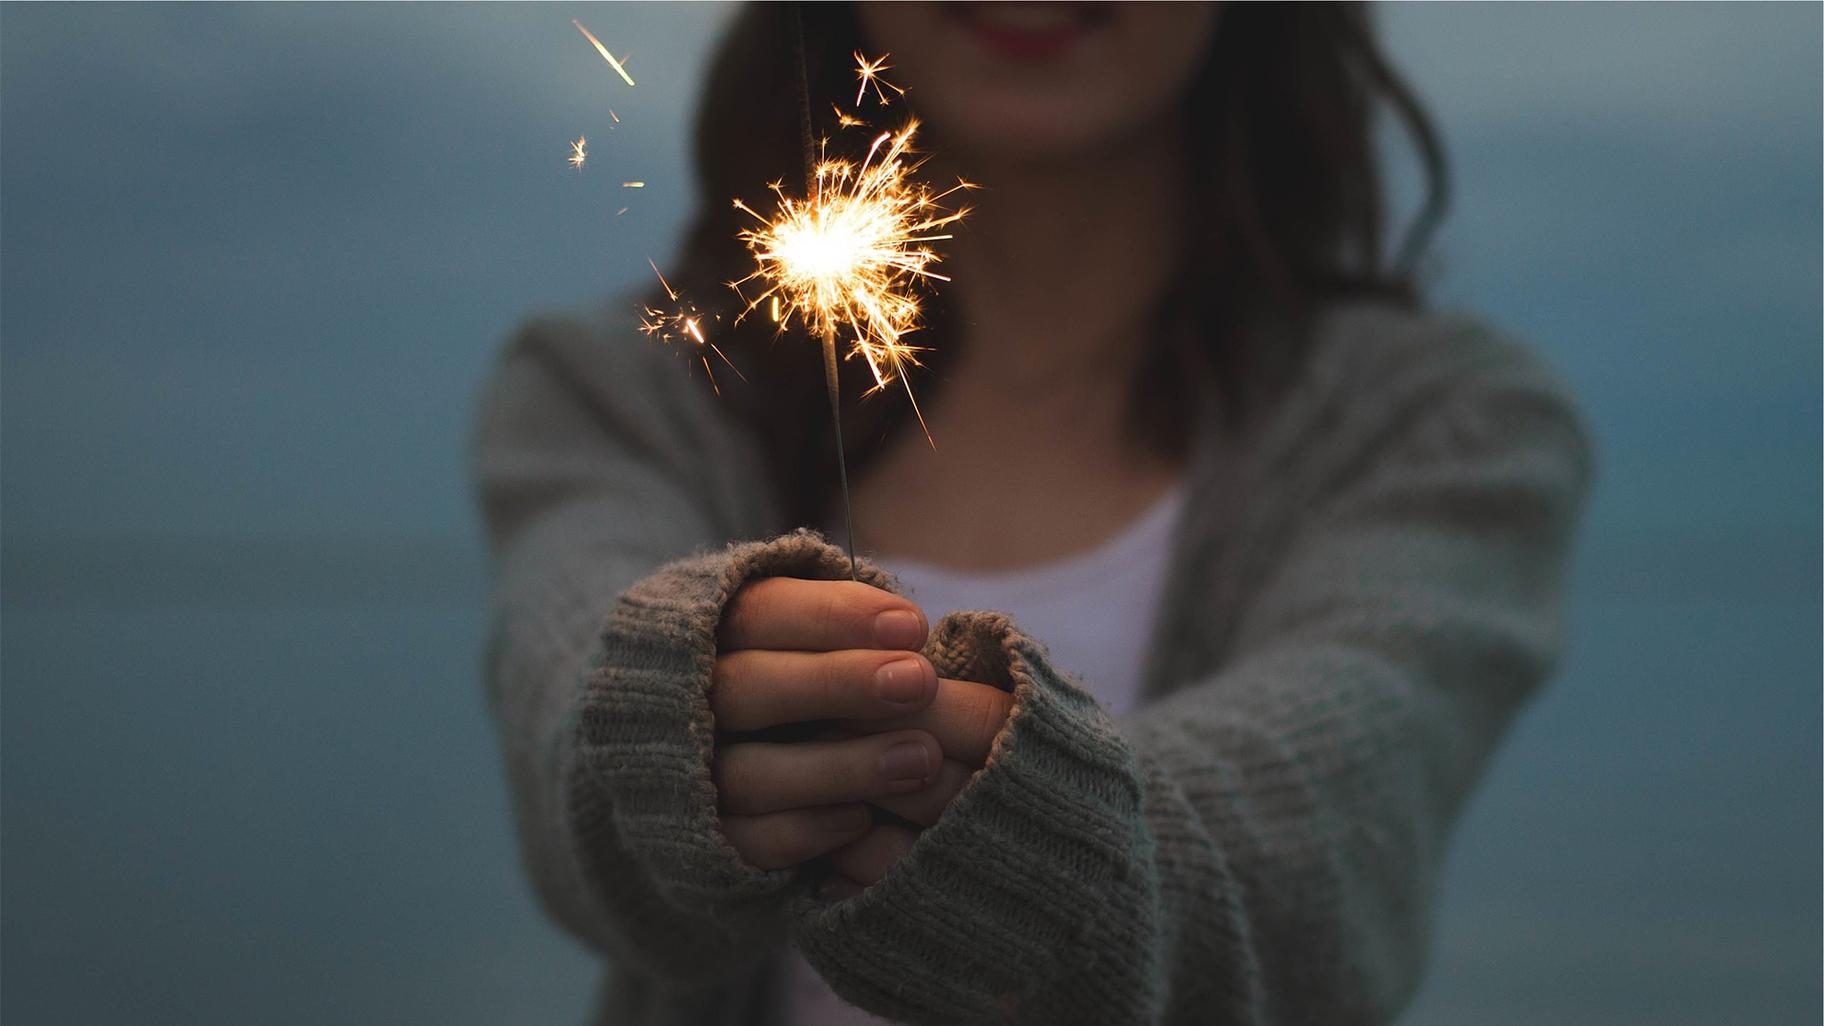 While the dangers around illegal fireworks may be more obvious, legal alternatives like sparklers aren’t necessarily safe, says a local health official. (Free-Photos / Pixabay)